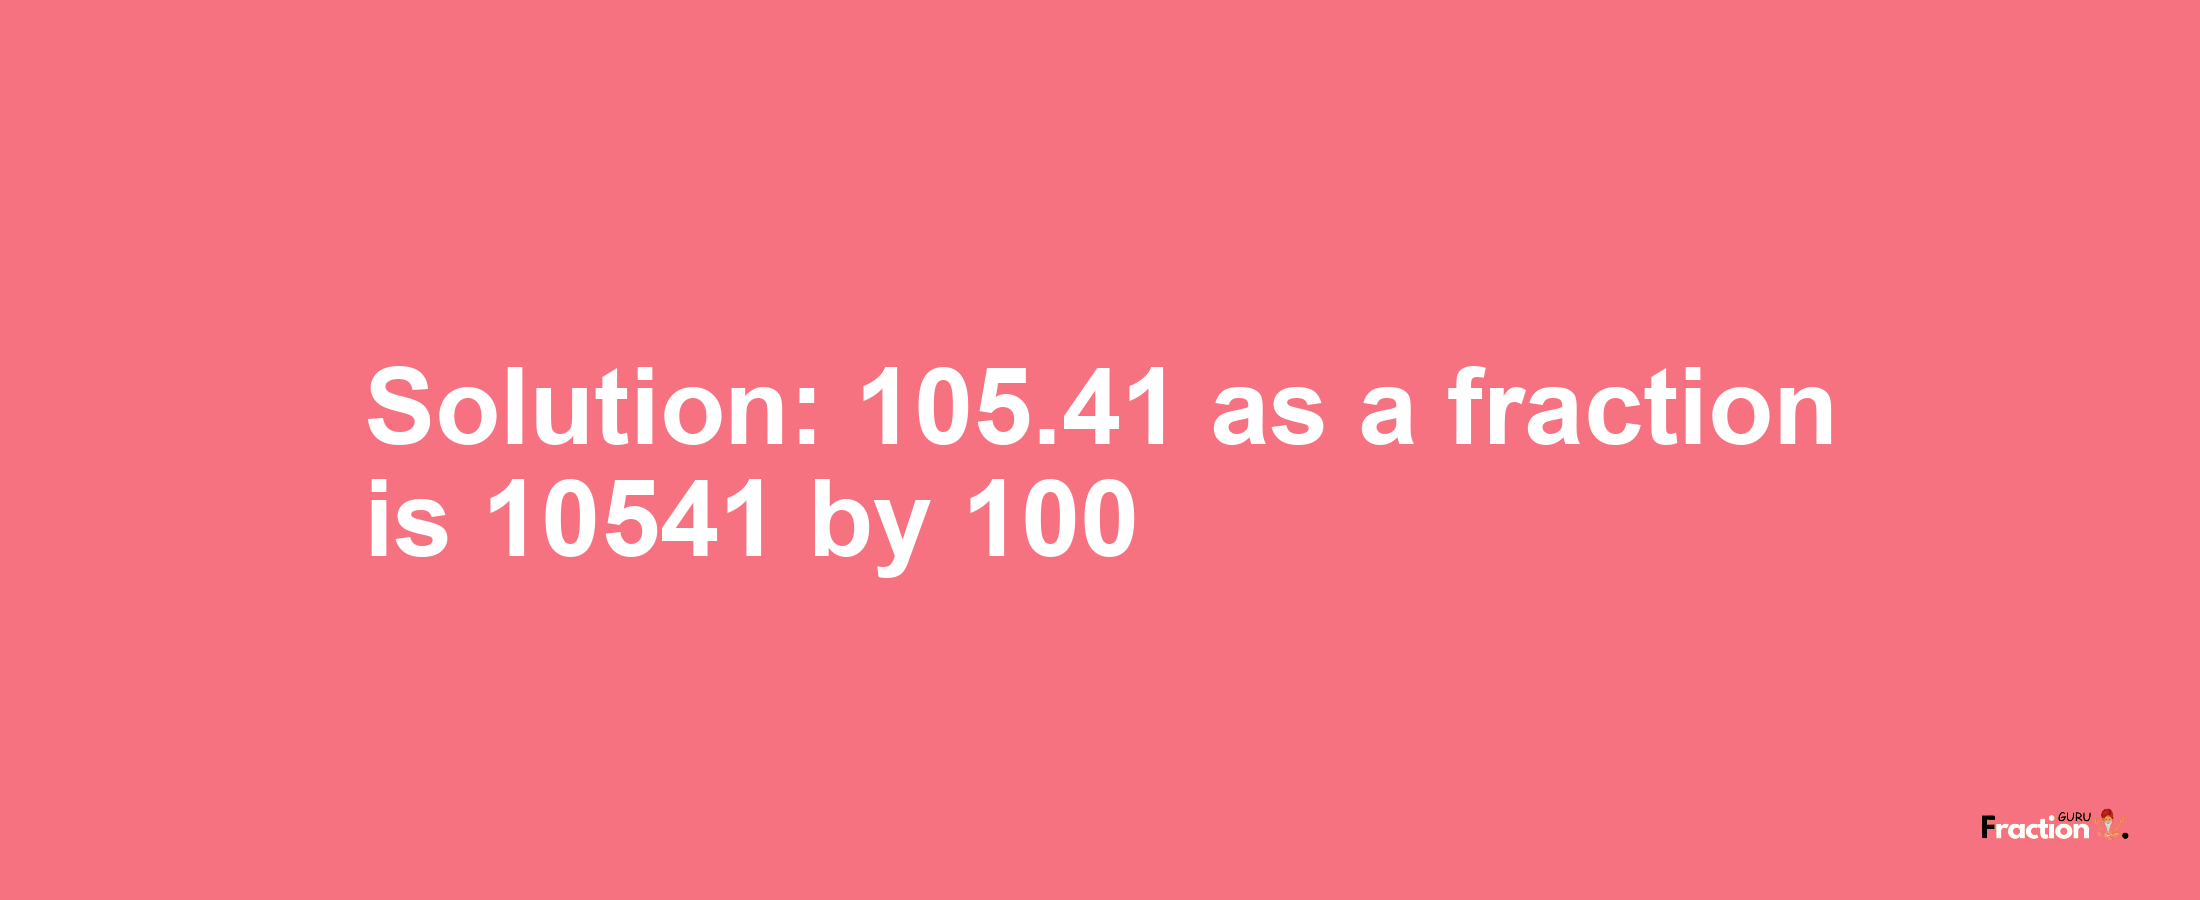 Solution:105.41 as a fraction is 10541/100